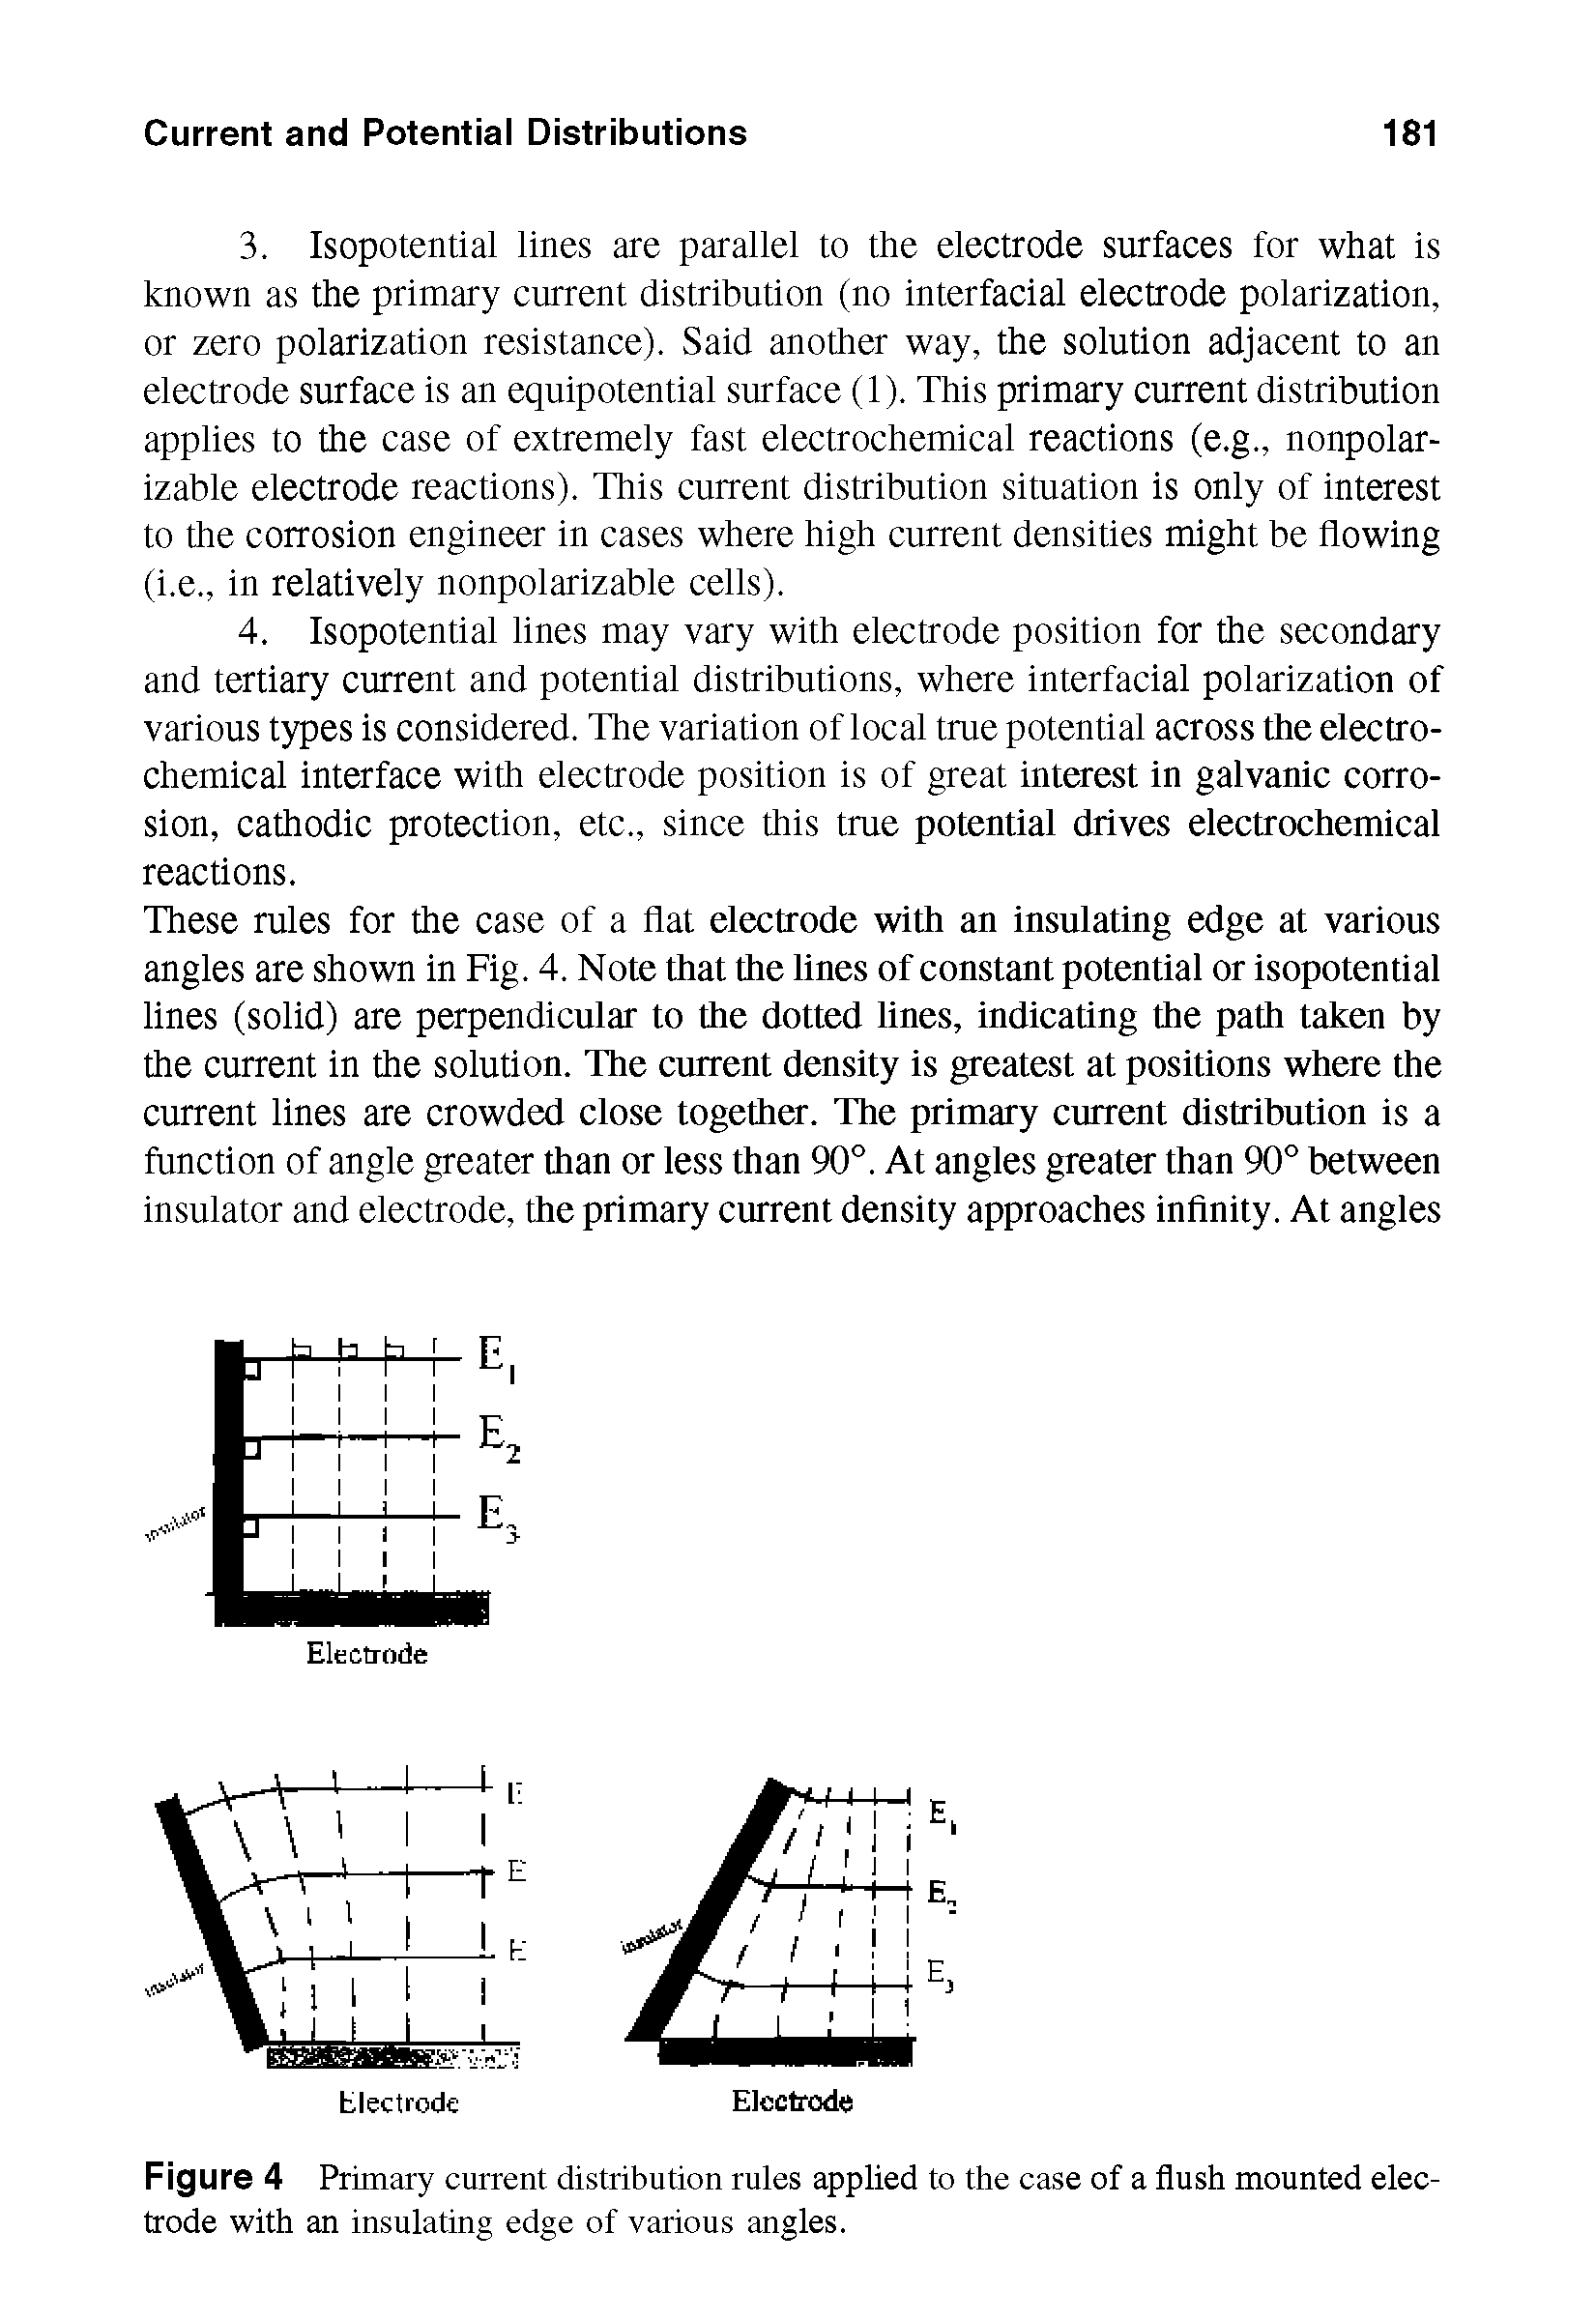 Figure 4 Primary current distribution rules applied to the case of a flush mounted electrode with an insulating edge of various angles.